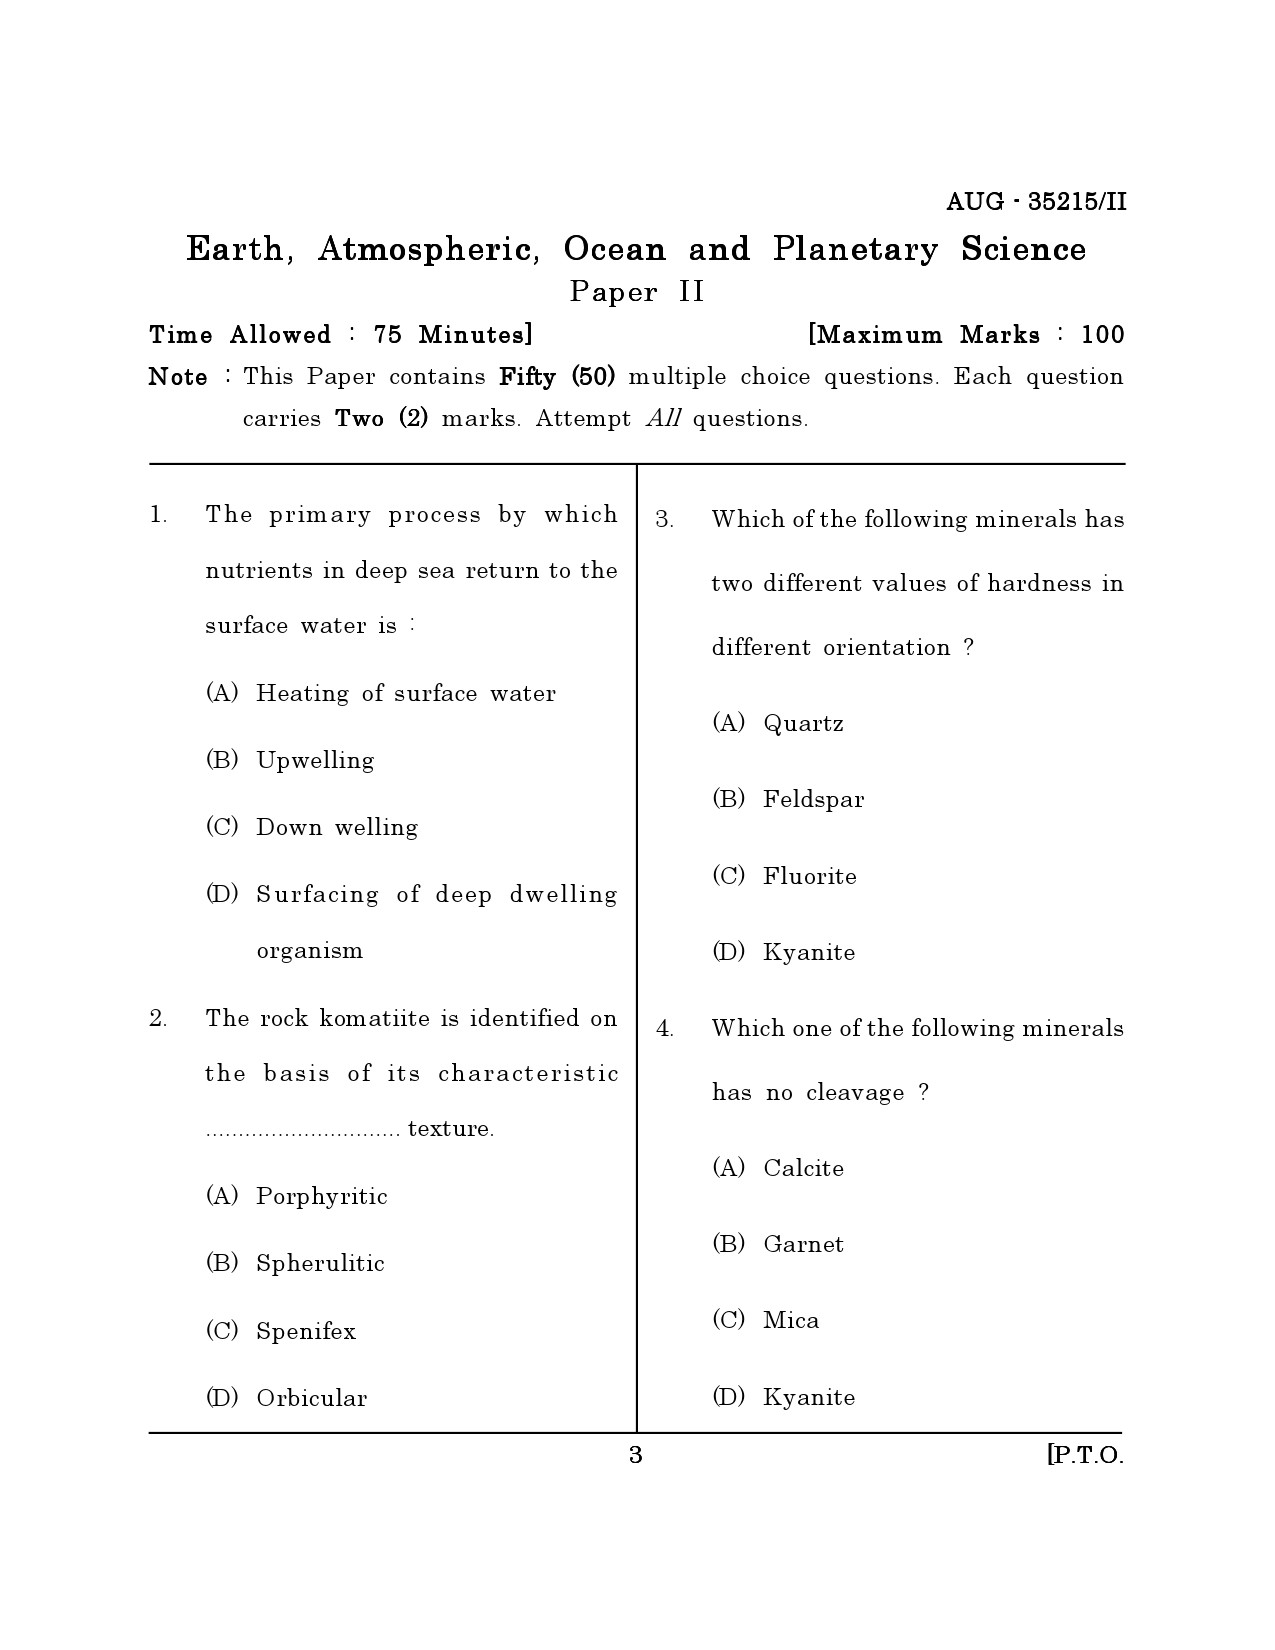 Maharashtra SET Earth Atmospheric Ocean Planetary Science Question Paper II August 2015 2